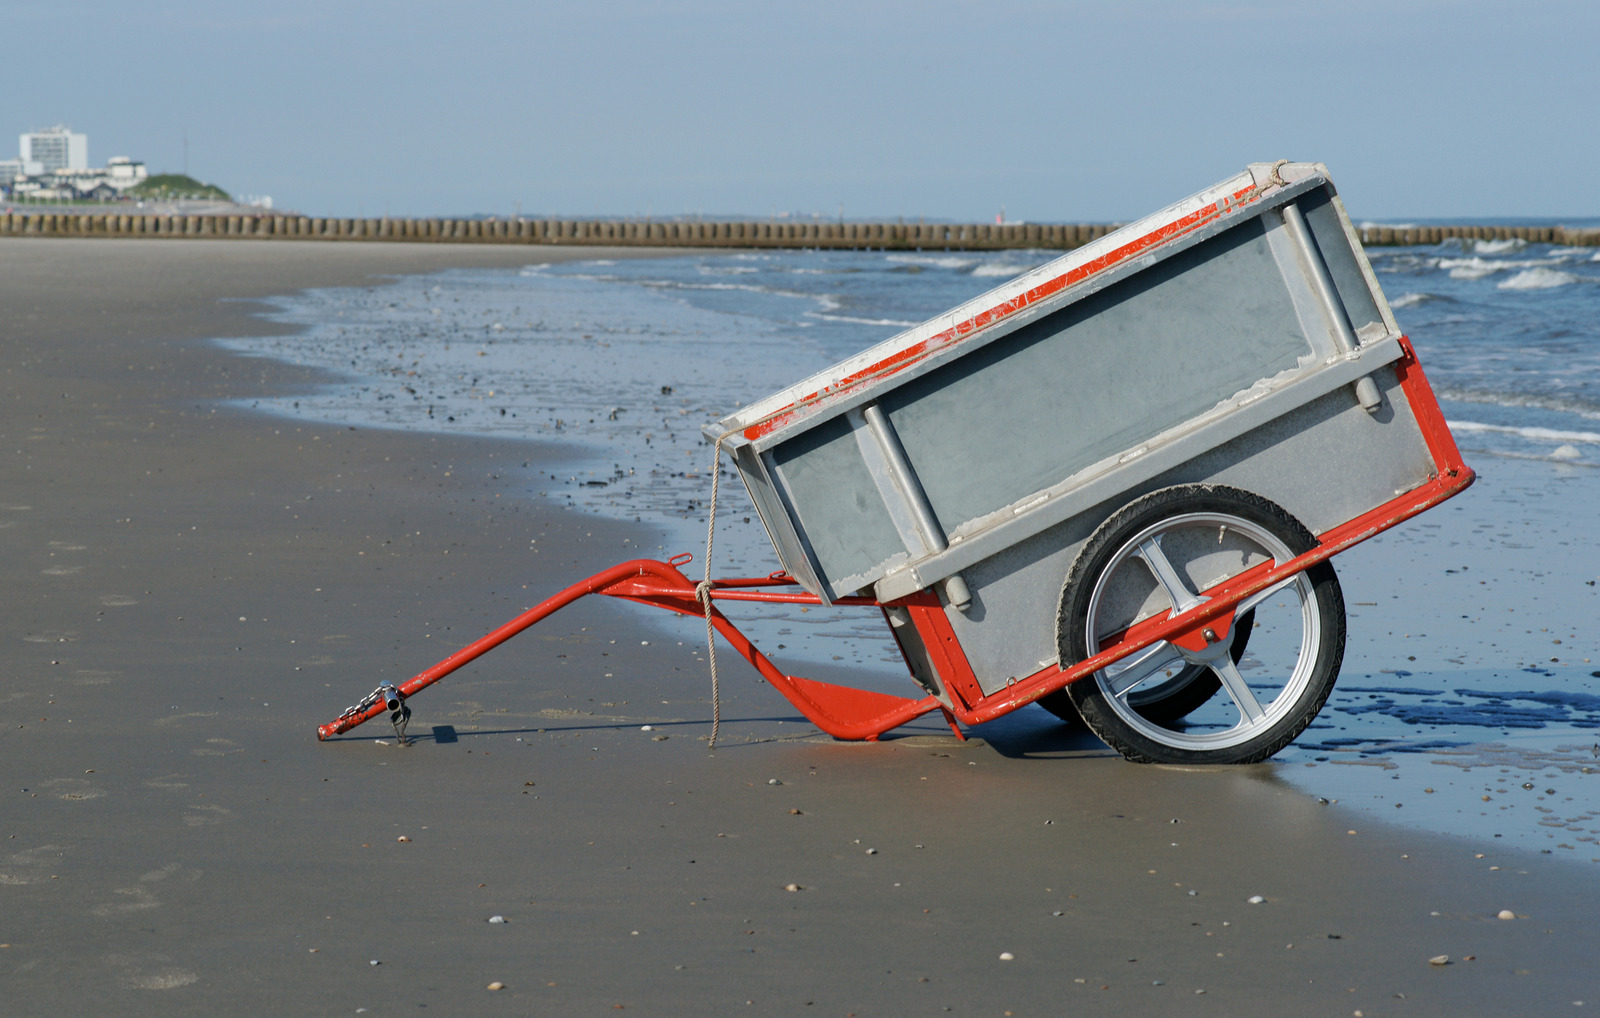 Typical beach cart on the island Norderney.